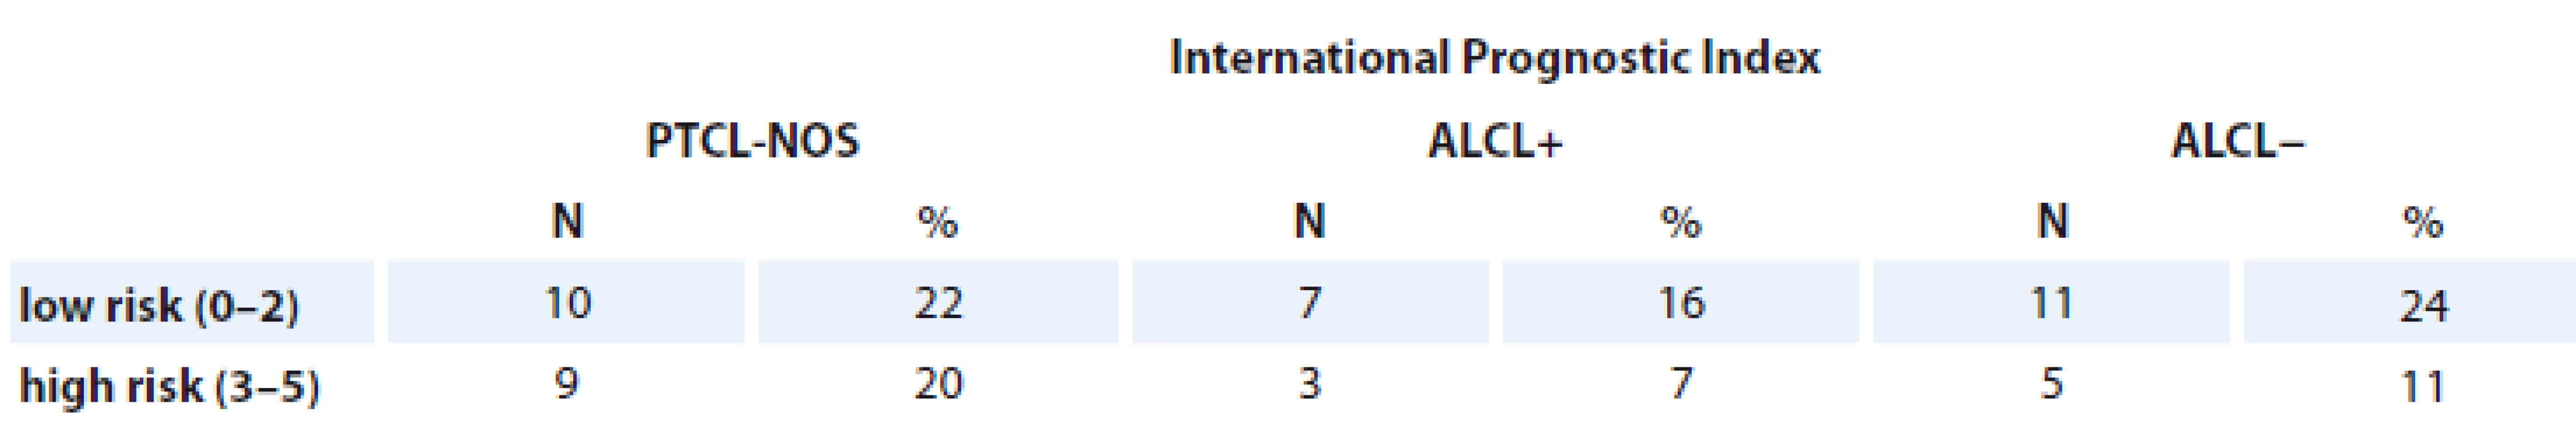 Patients assessed with International Prognostic Index.